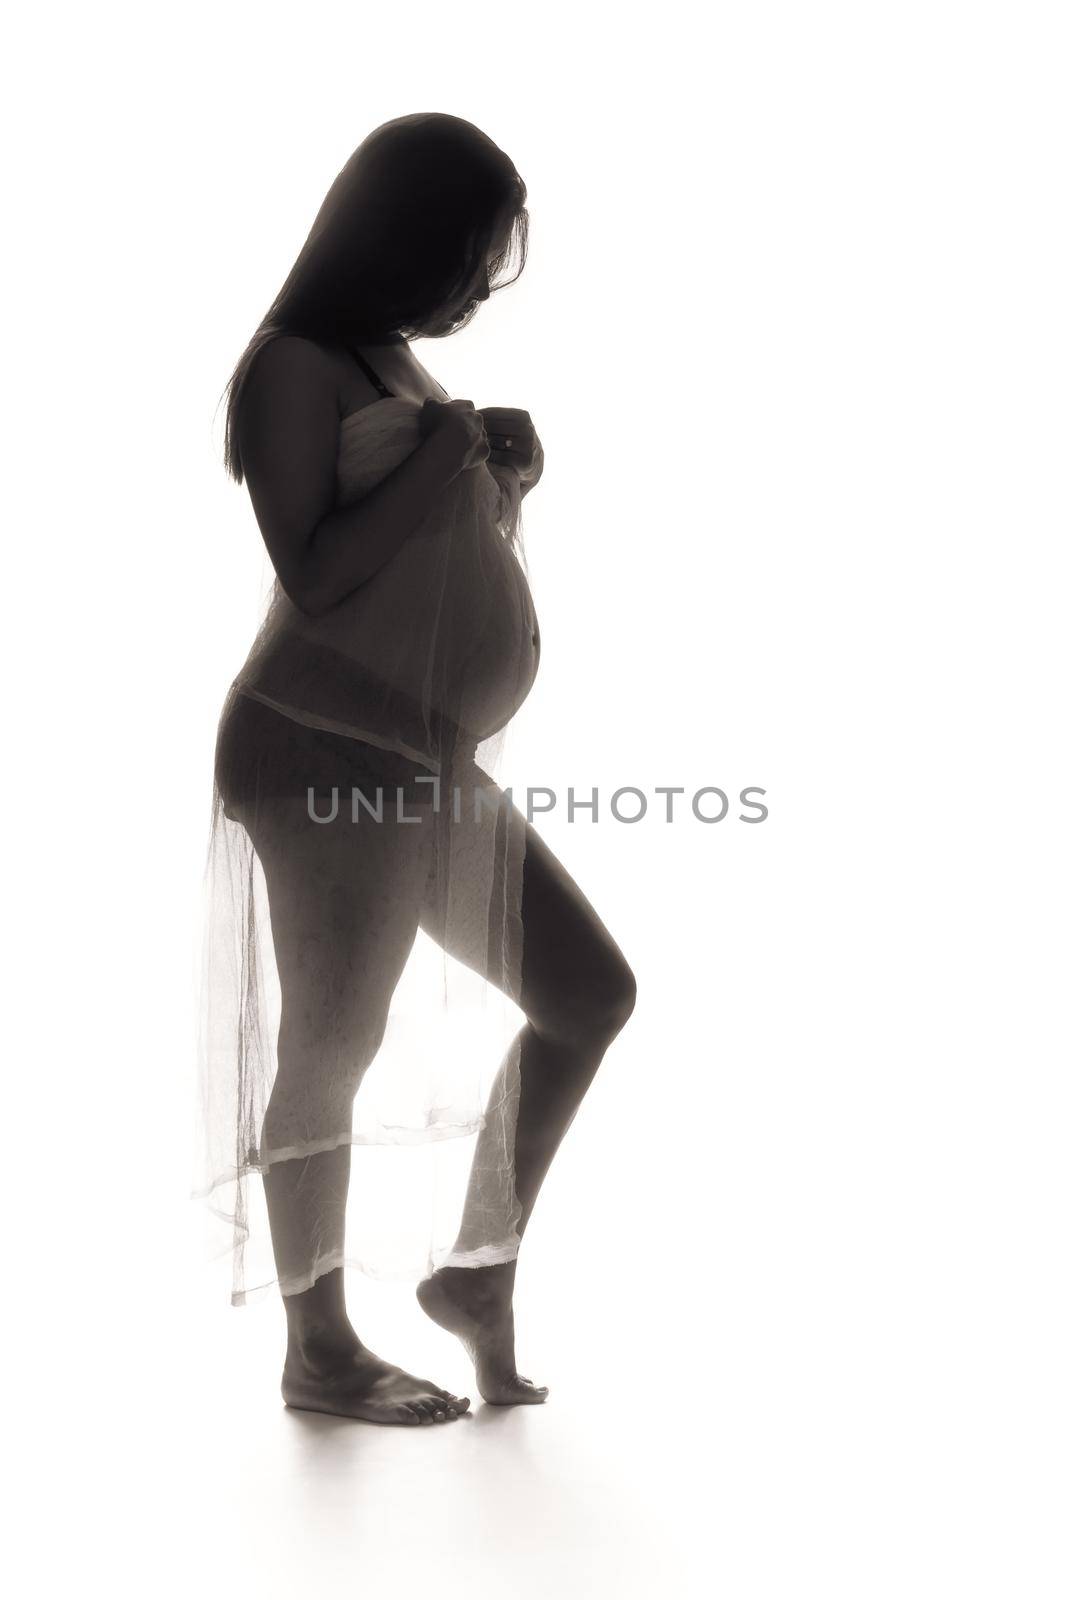 Backlit low key photo of a young pregnant woman.